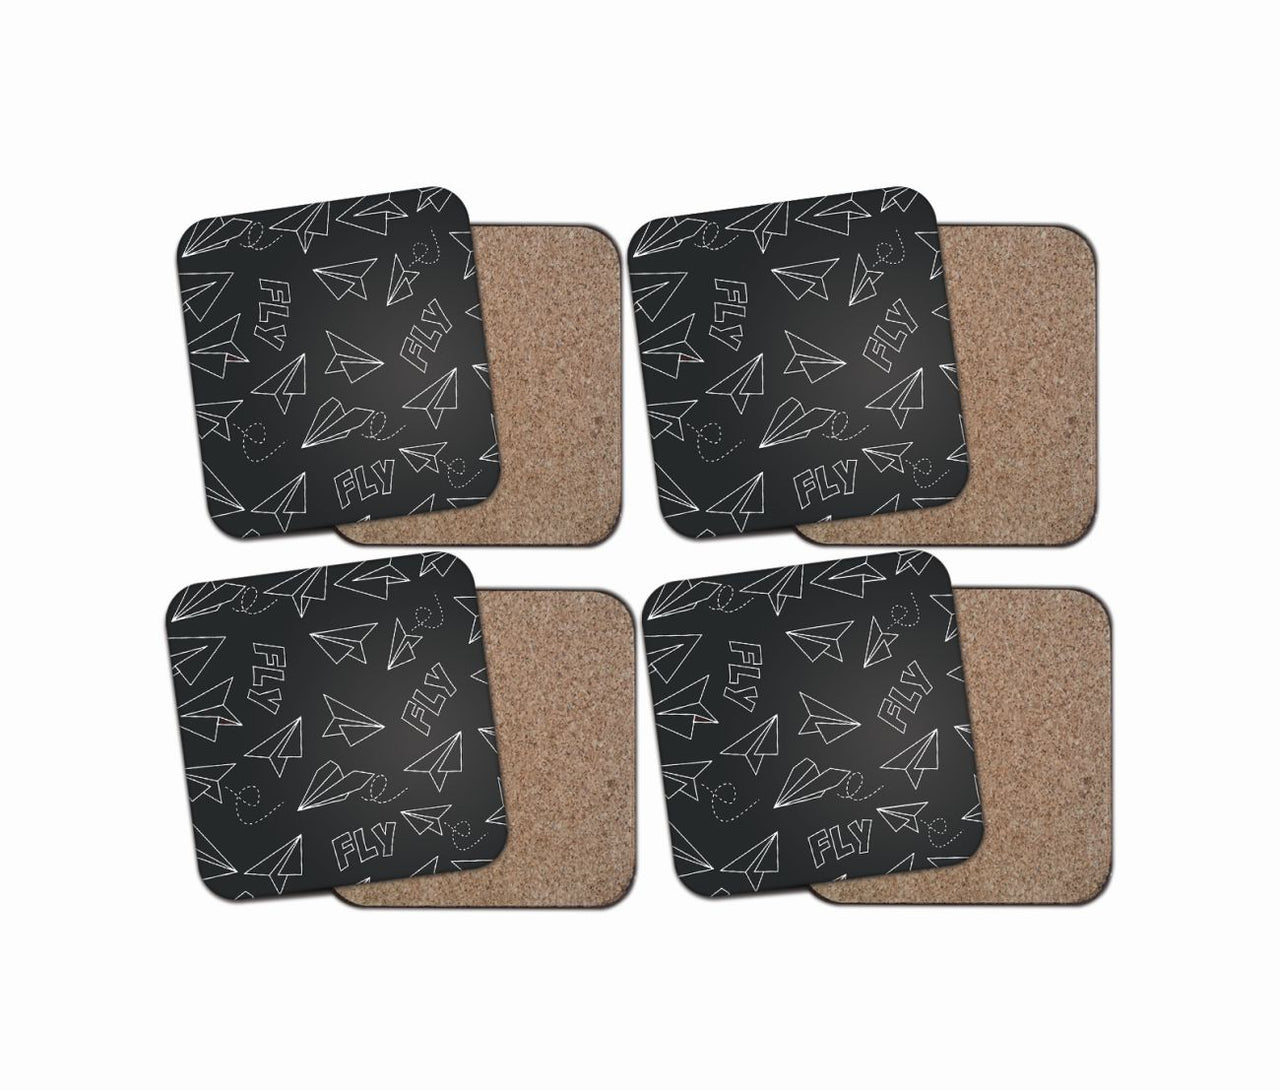 Paper Airplane & Fly (Gray) Designed Coasters